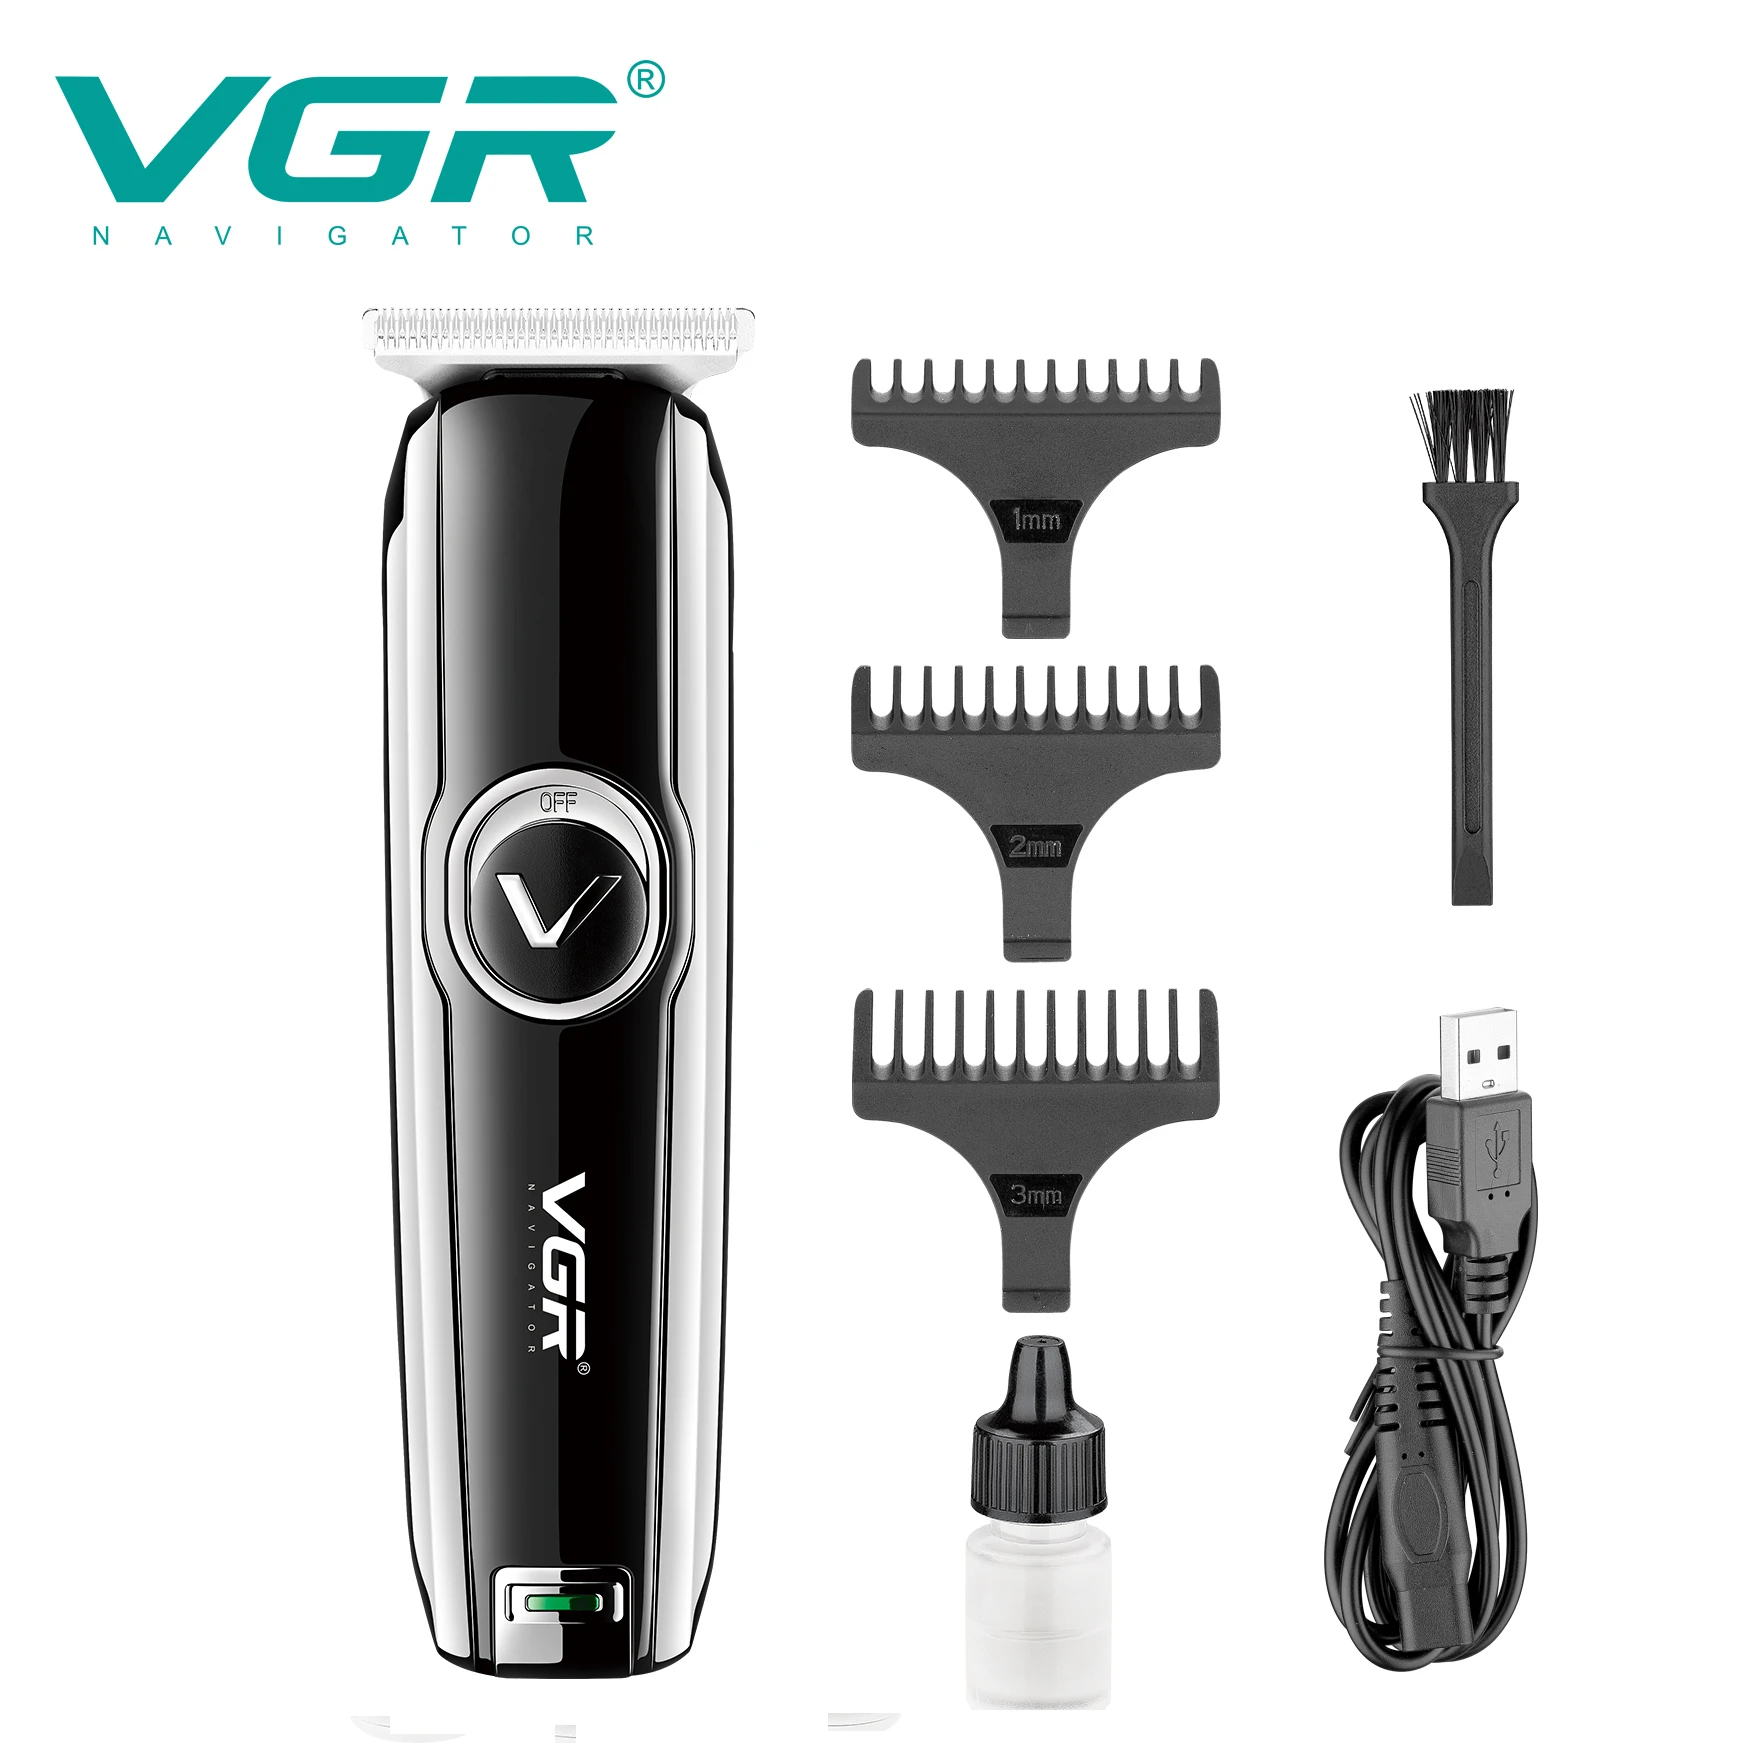 Professional cordless zero cutting hair trimmer with stainless steel T blade V-168